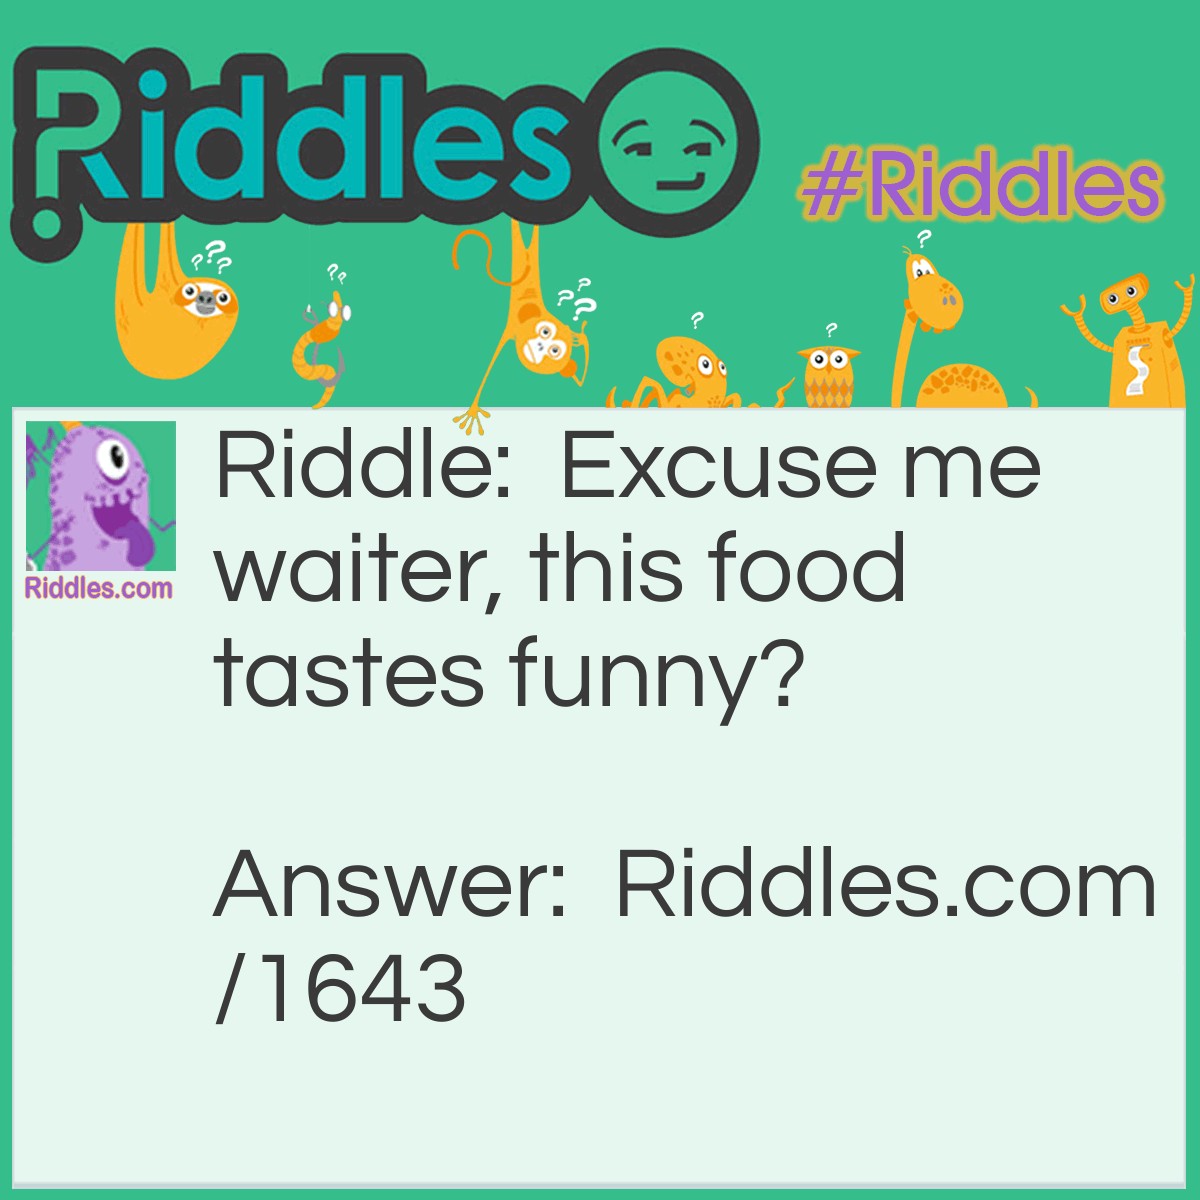 Riddle: Excuse me waiter, this food tastes funny? Answer: Then why aren't you laughing?